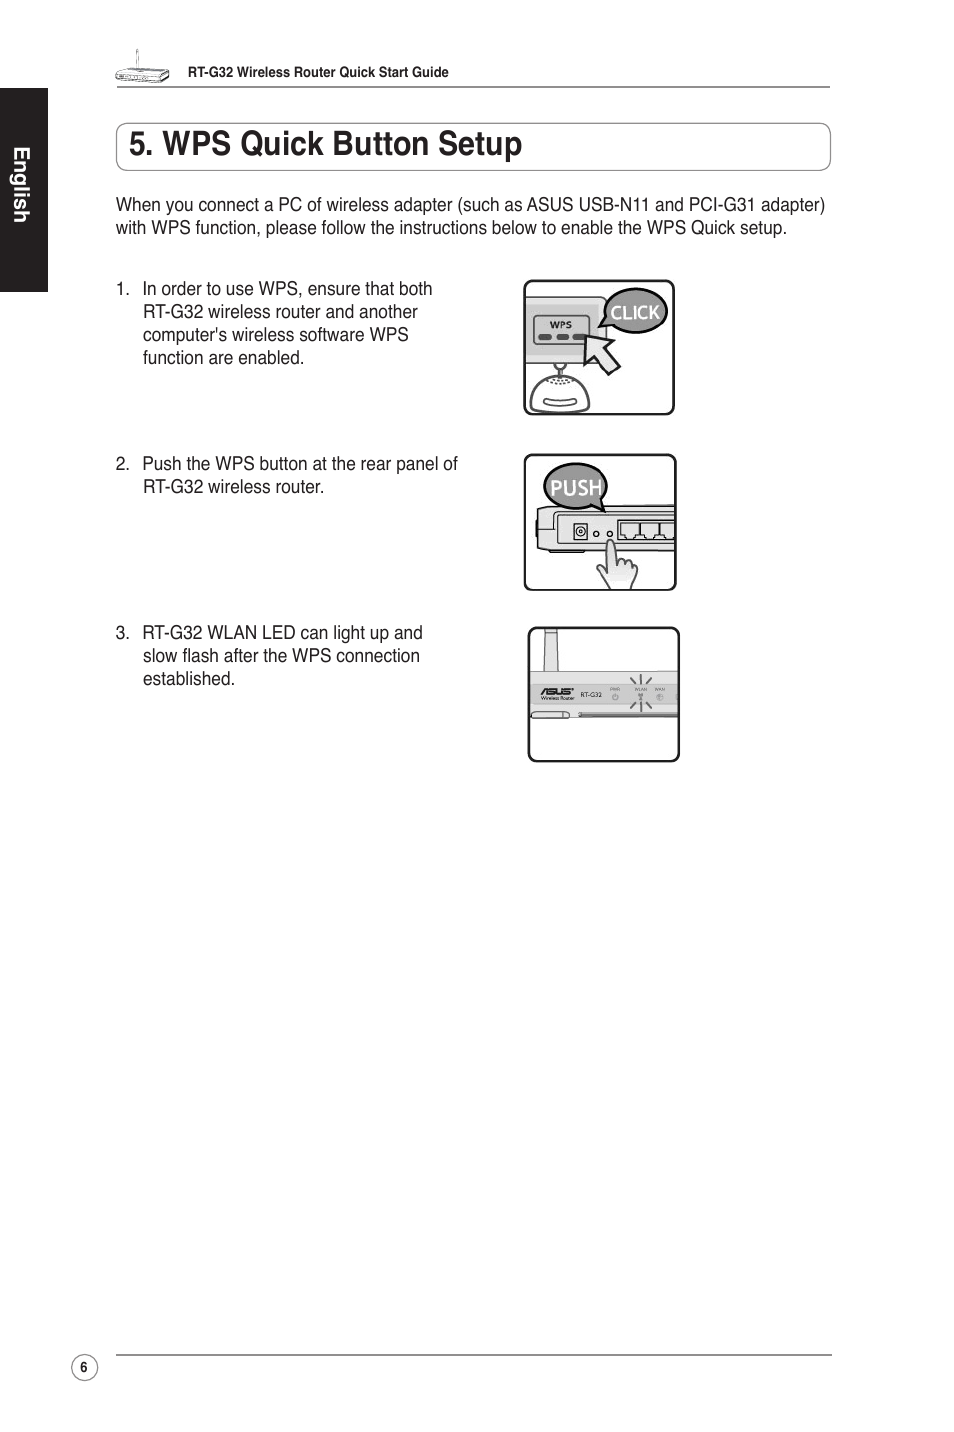 Wps quick button setup | Asus RT-G32 User Manual | Page 14 / 51